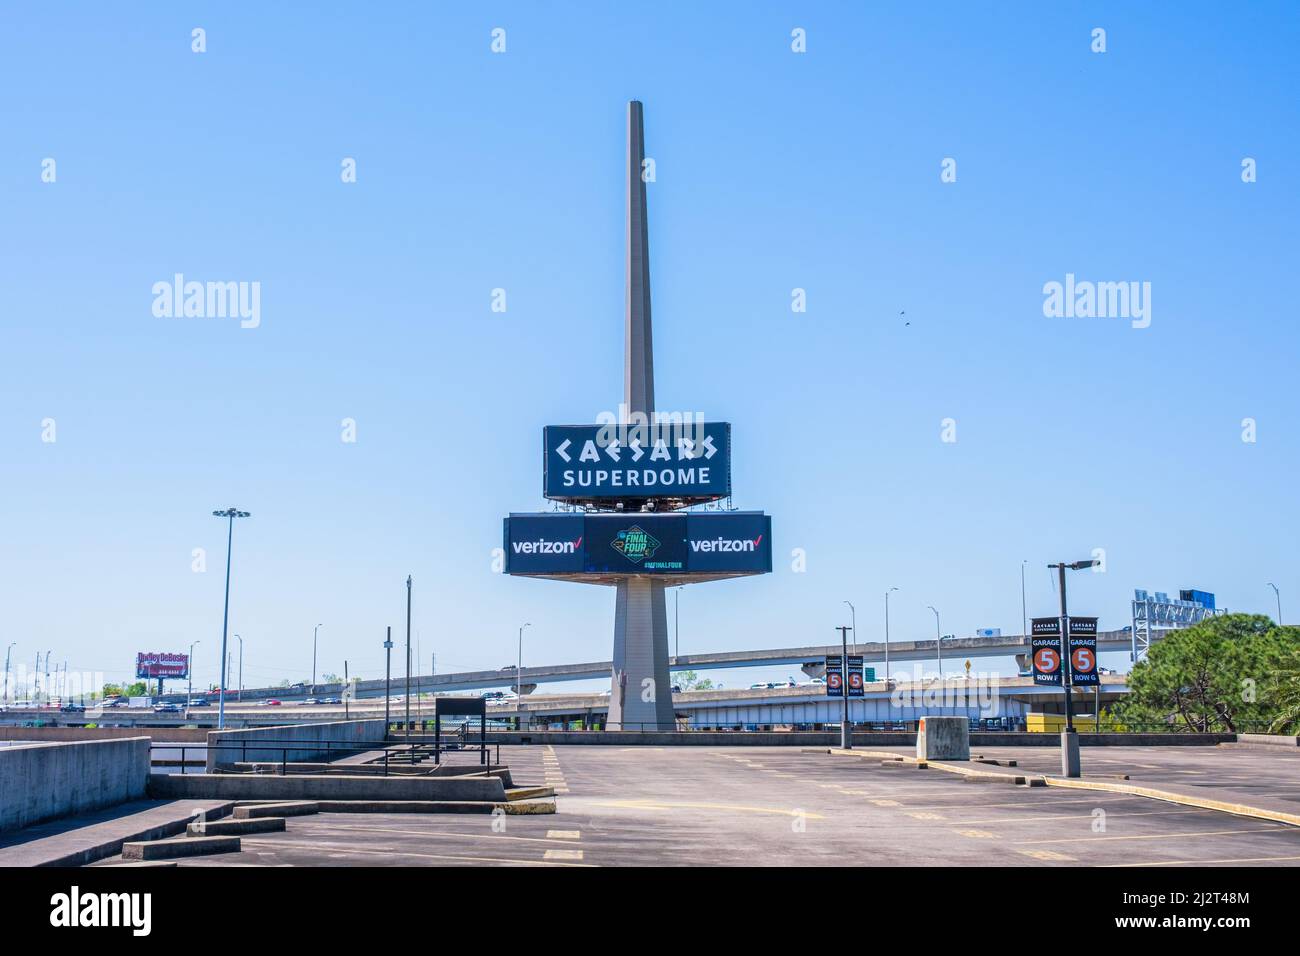 NEW ORLEANS, LA, USA - APRIL 3, 2022: Caesar's Superdome sign next to parking garage and Pontchartrain Expressway in the background Stock Photo